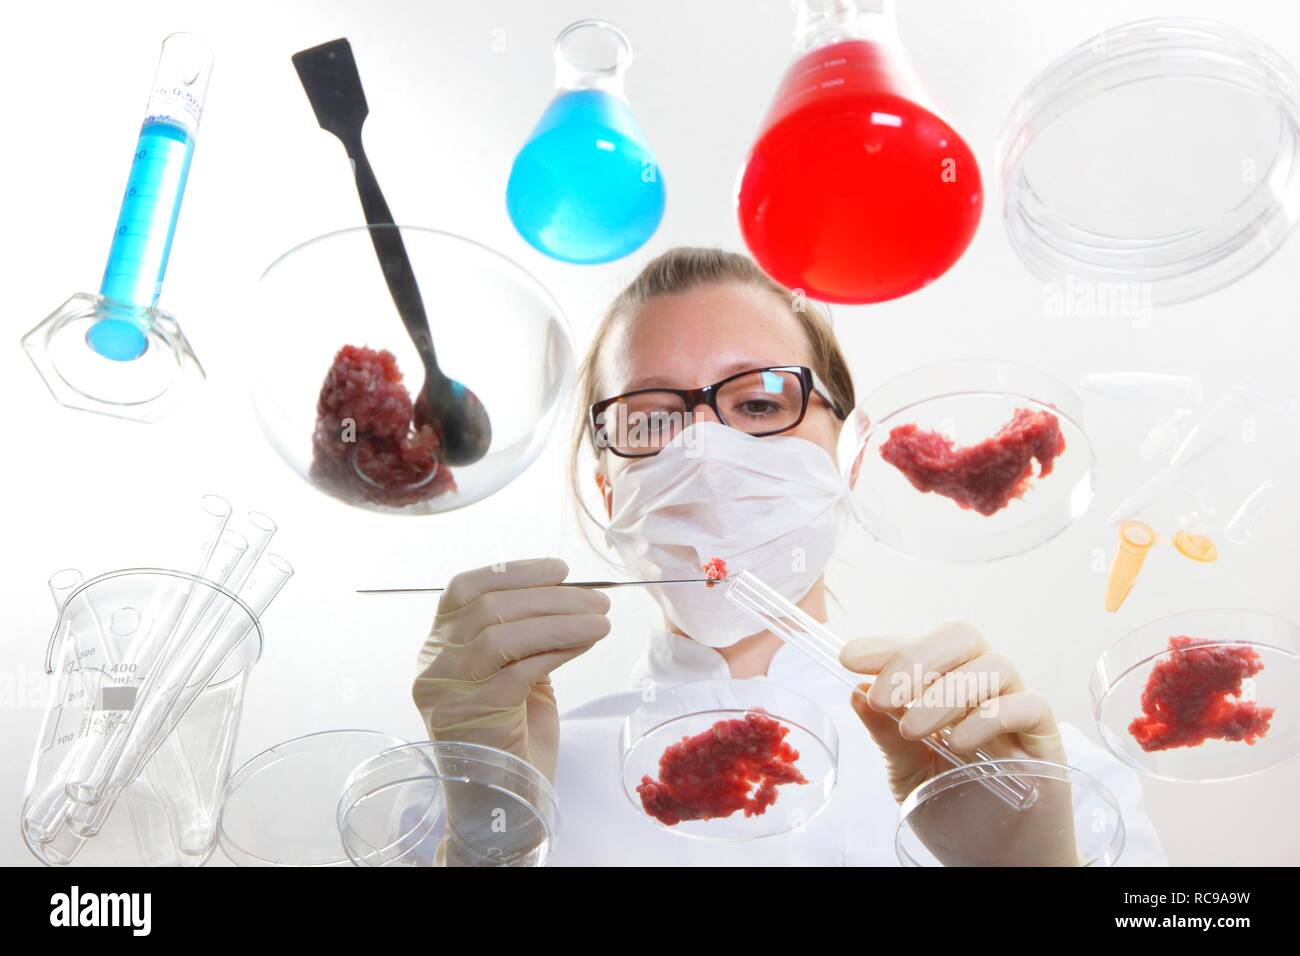 Food testing, laboratory technician examining minced meat samples, preparing them for tests for exposure to bacteria, pathogens Stock Photo